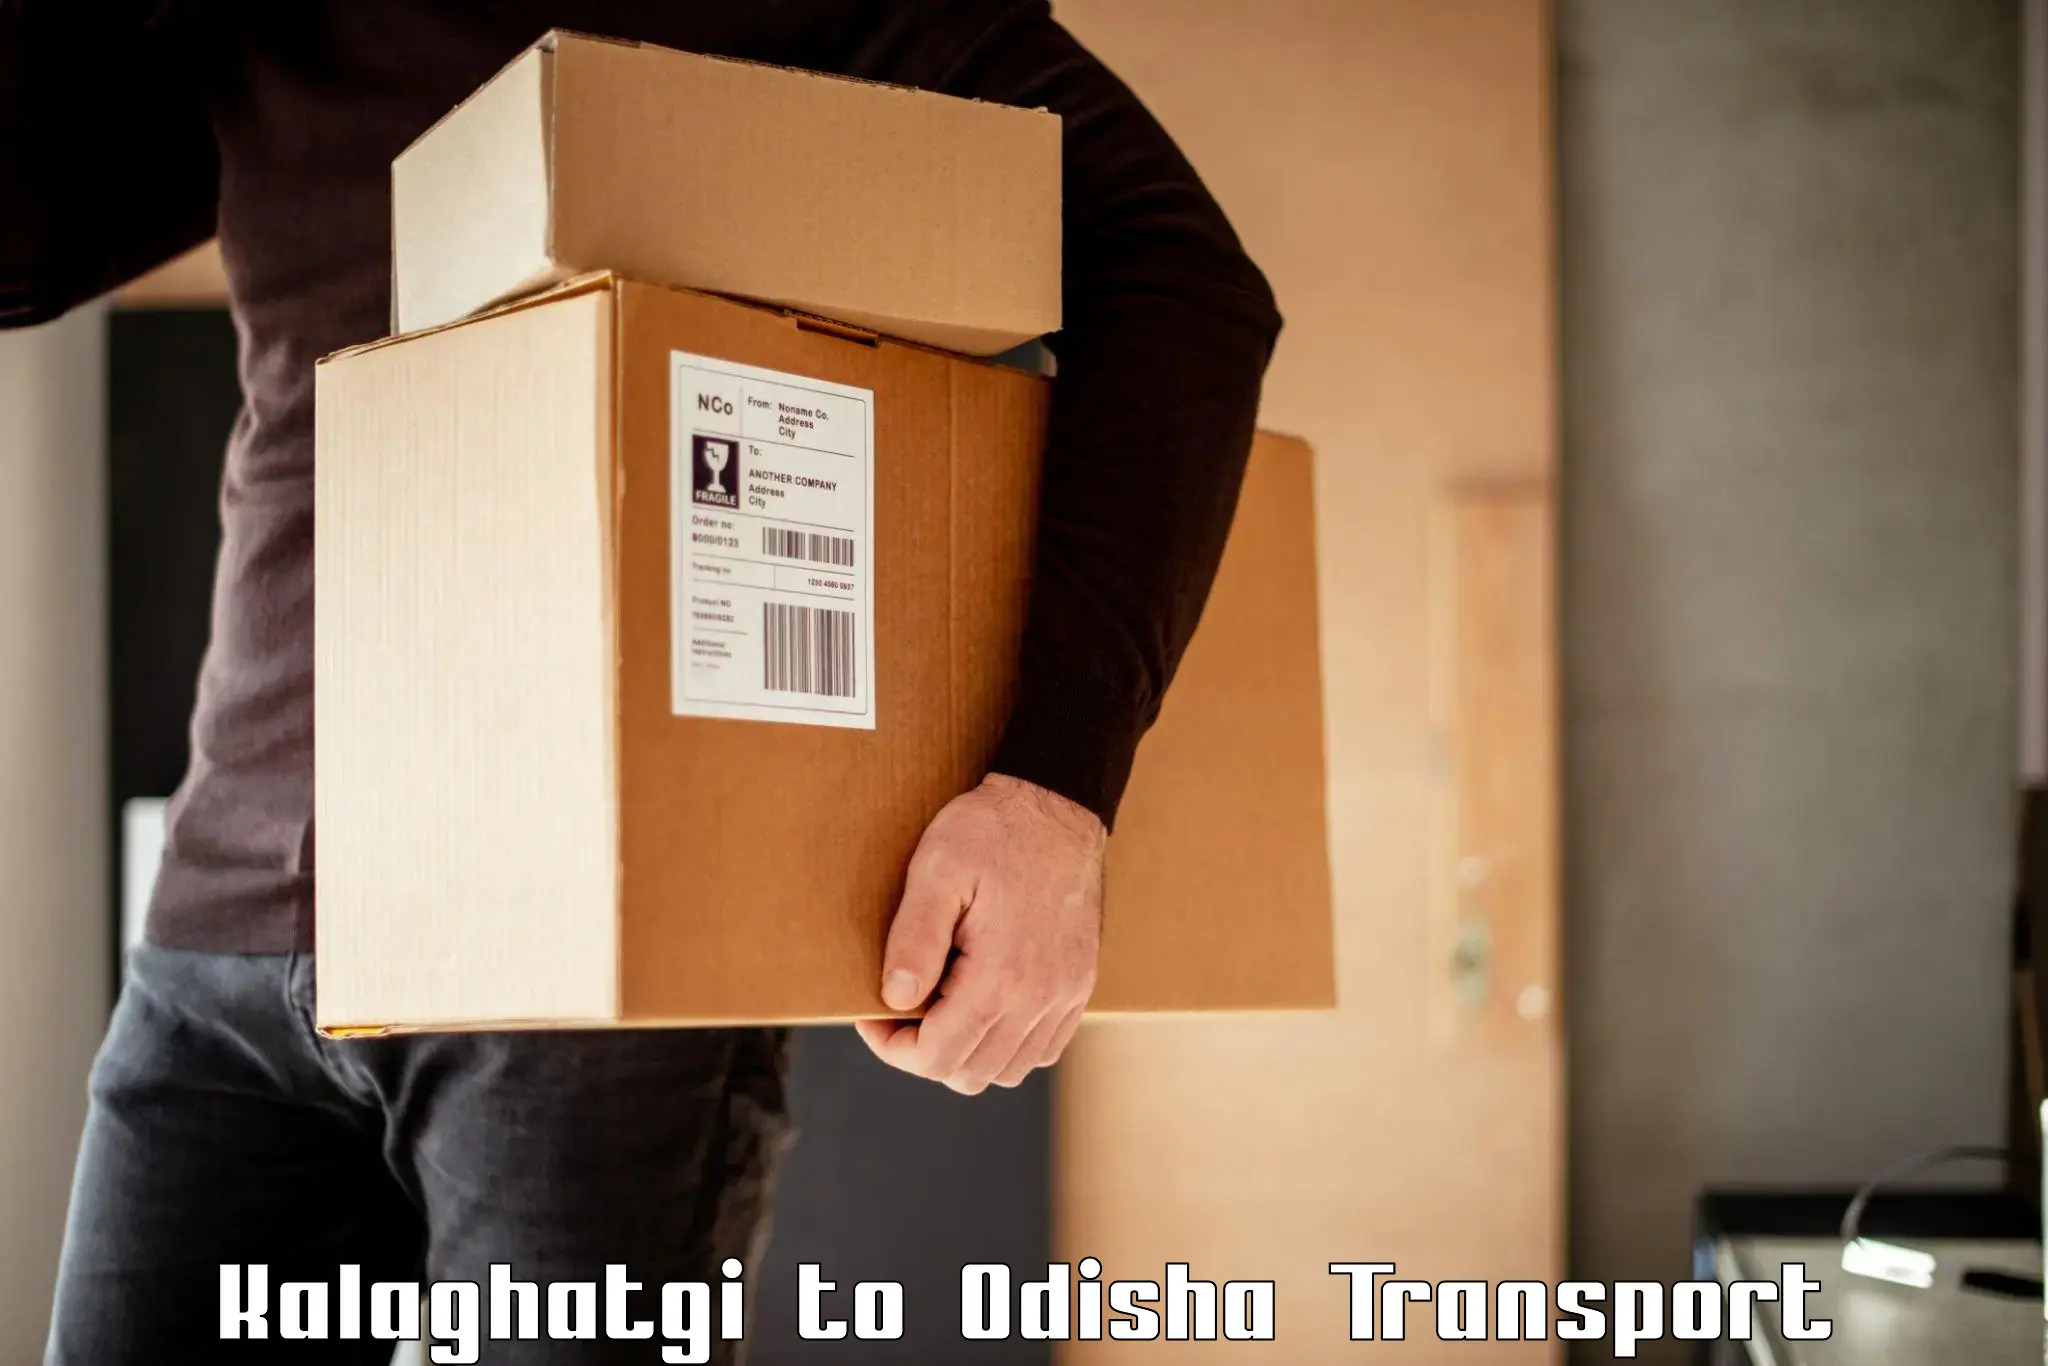 Best transport services in India Kalaghatgi to Balasore